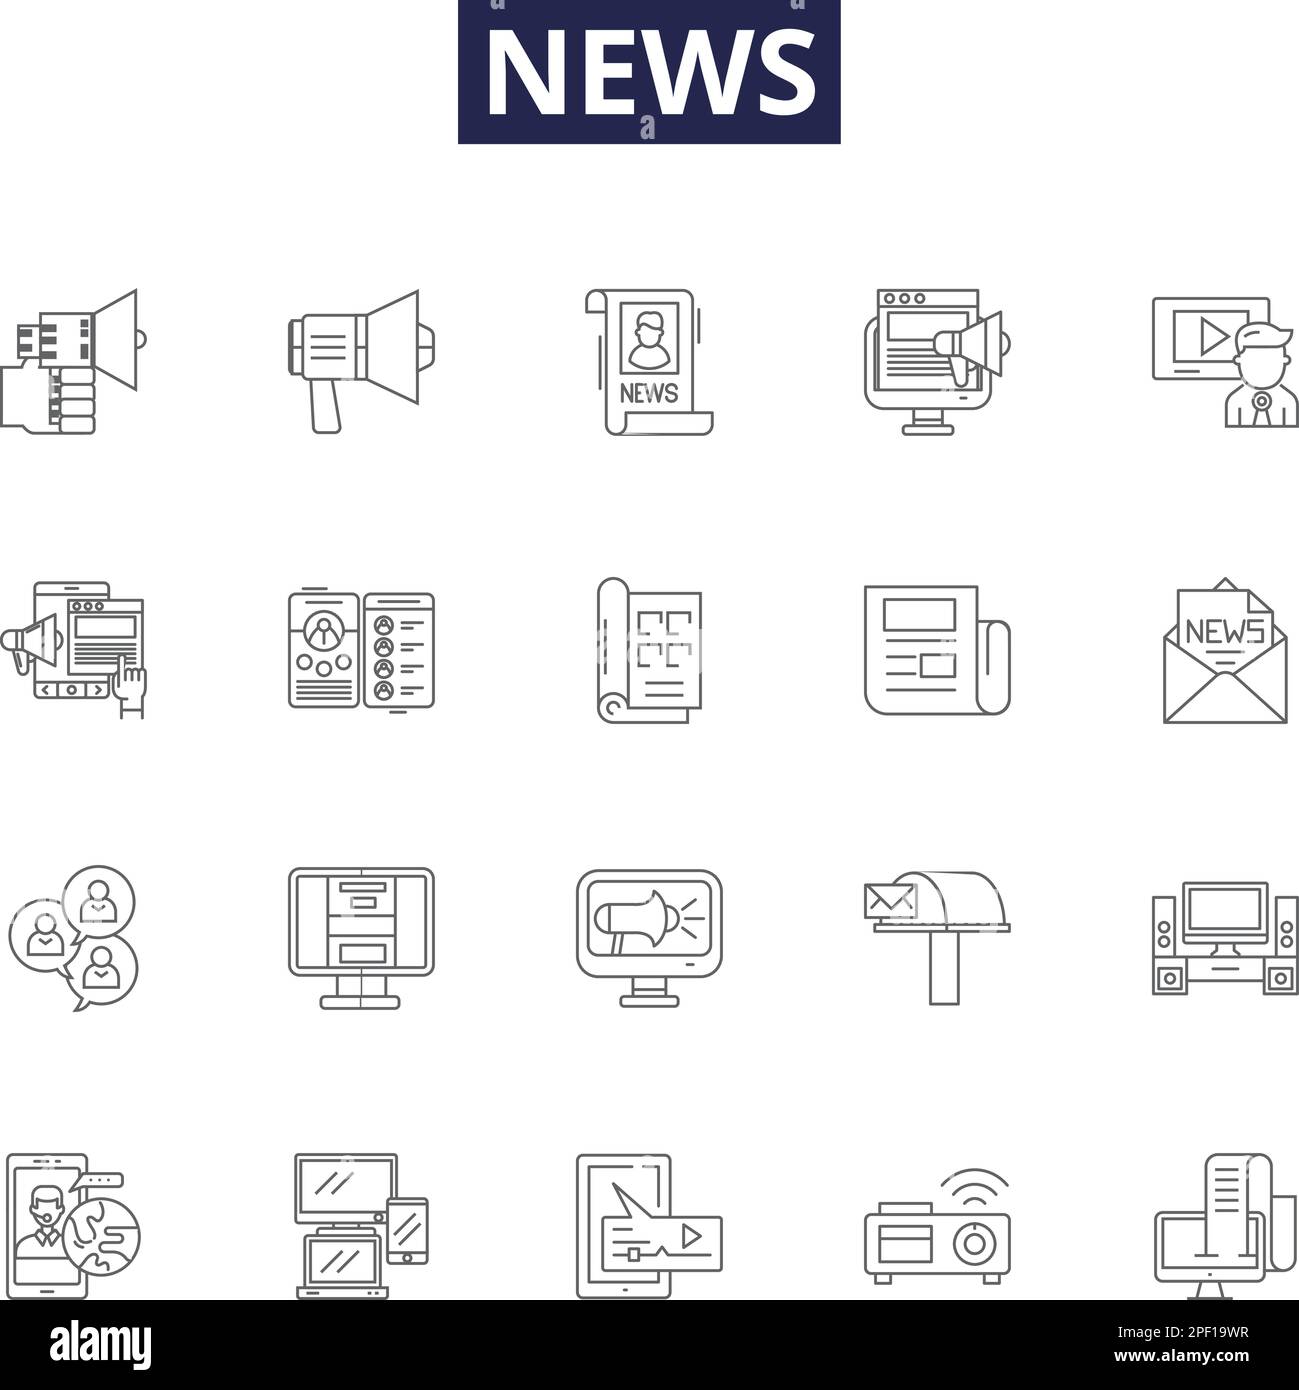 News line vector icons and signs. breaking news, headlines, journalism, media, papers, story, coverage, headline outline vector illustration set Stock Vector